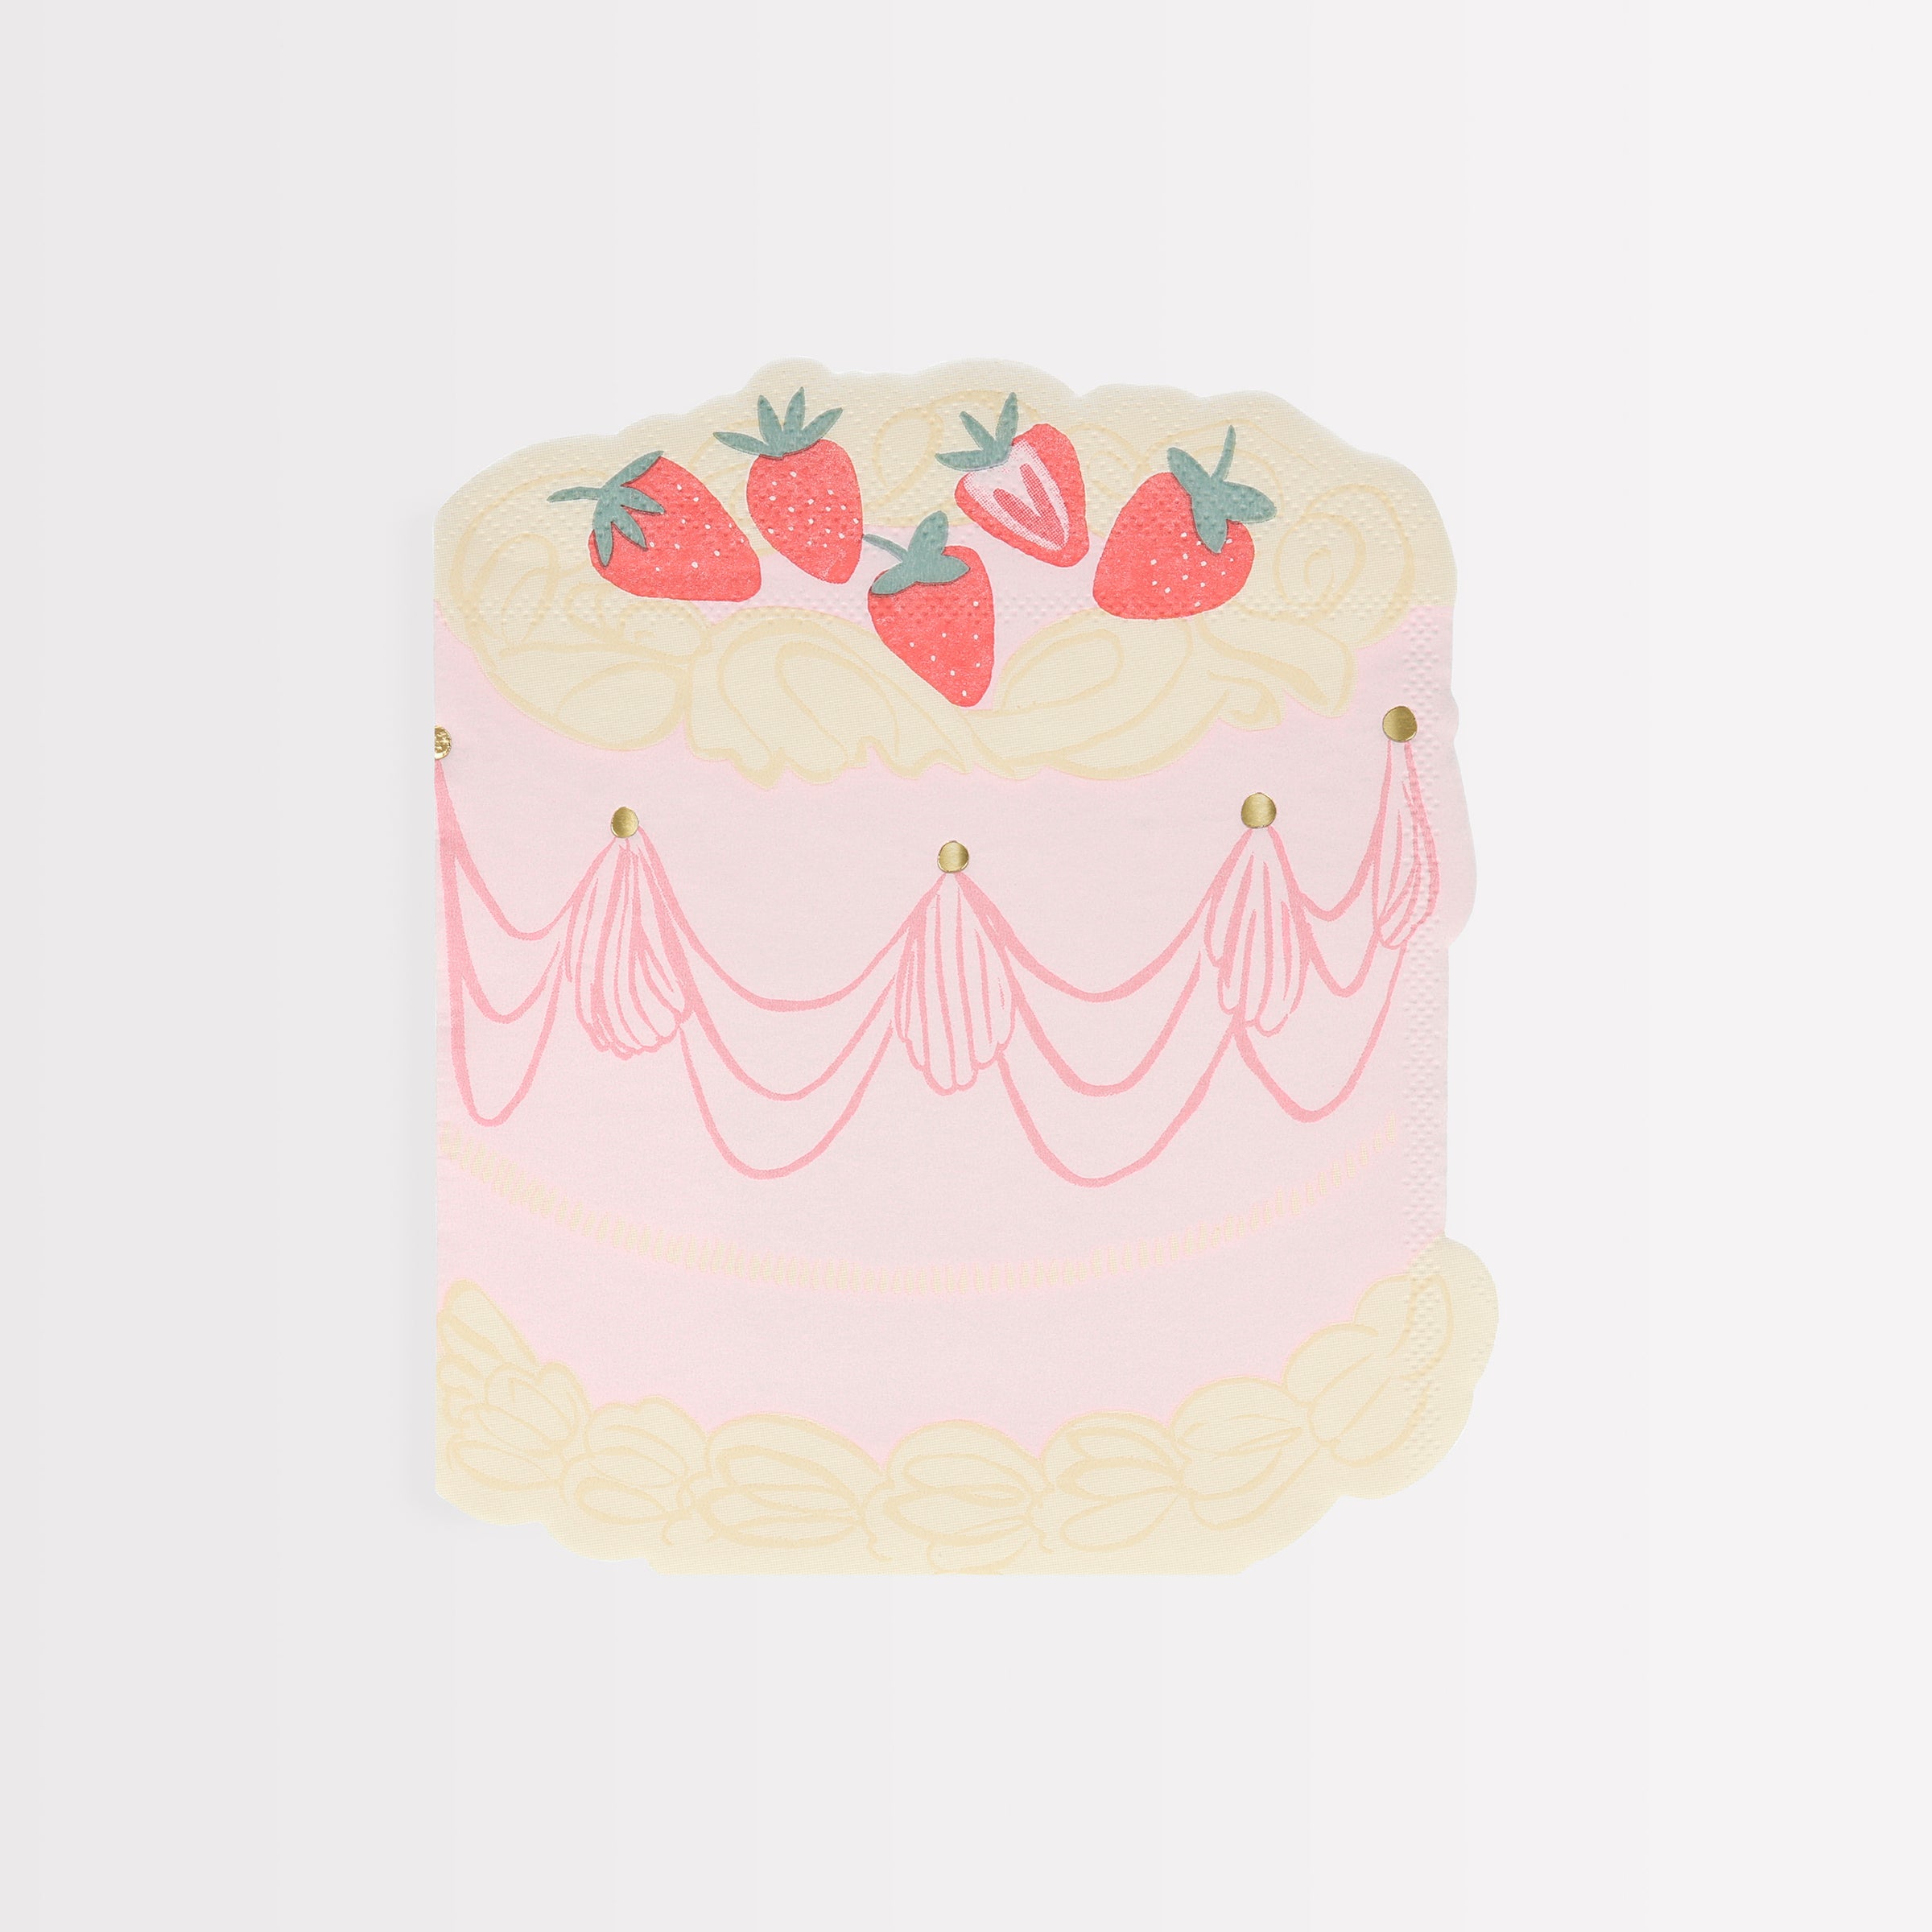 Our party napkins, large napkins in the shape of a strawberry cake, are ideal to add to your birthday party supplies or for garden parties.